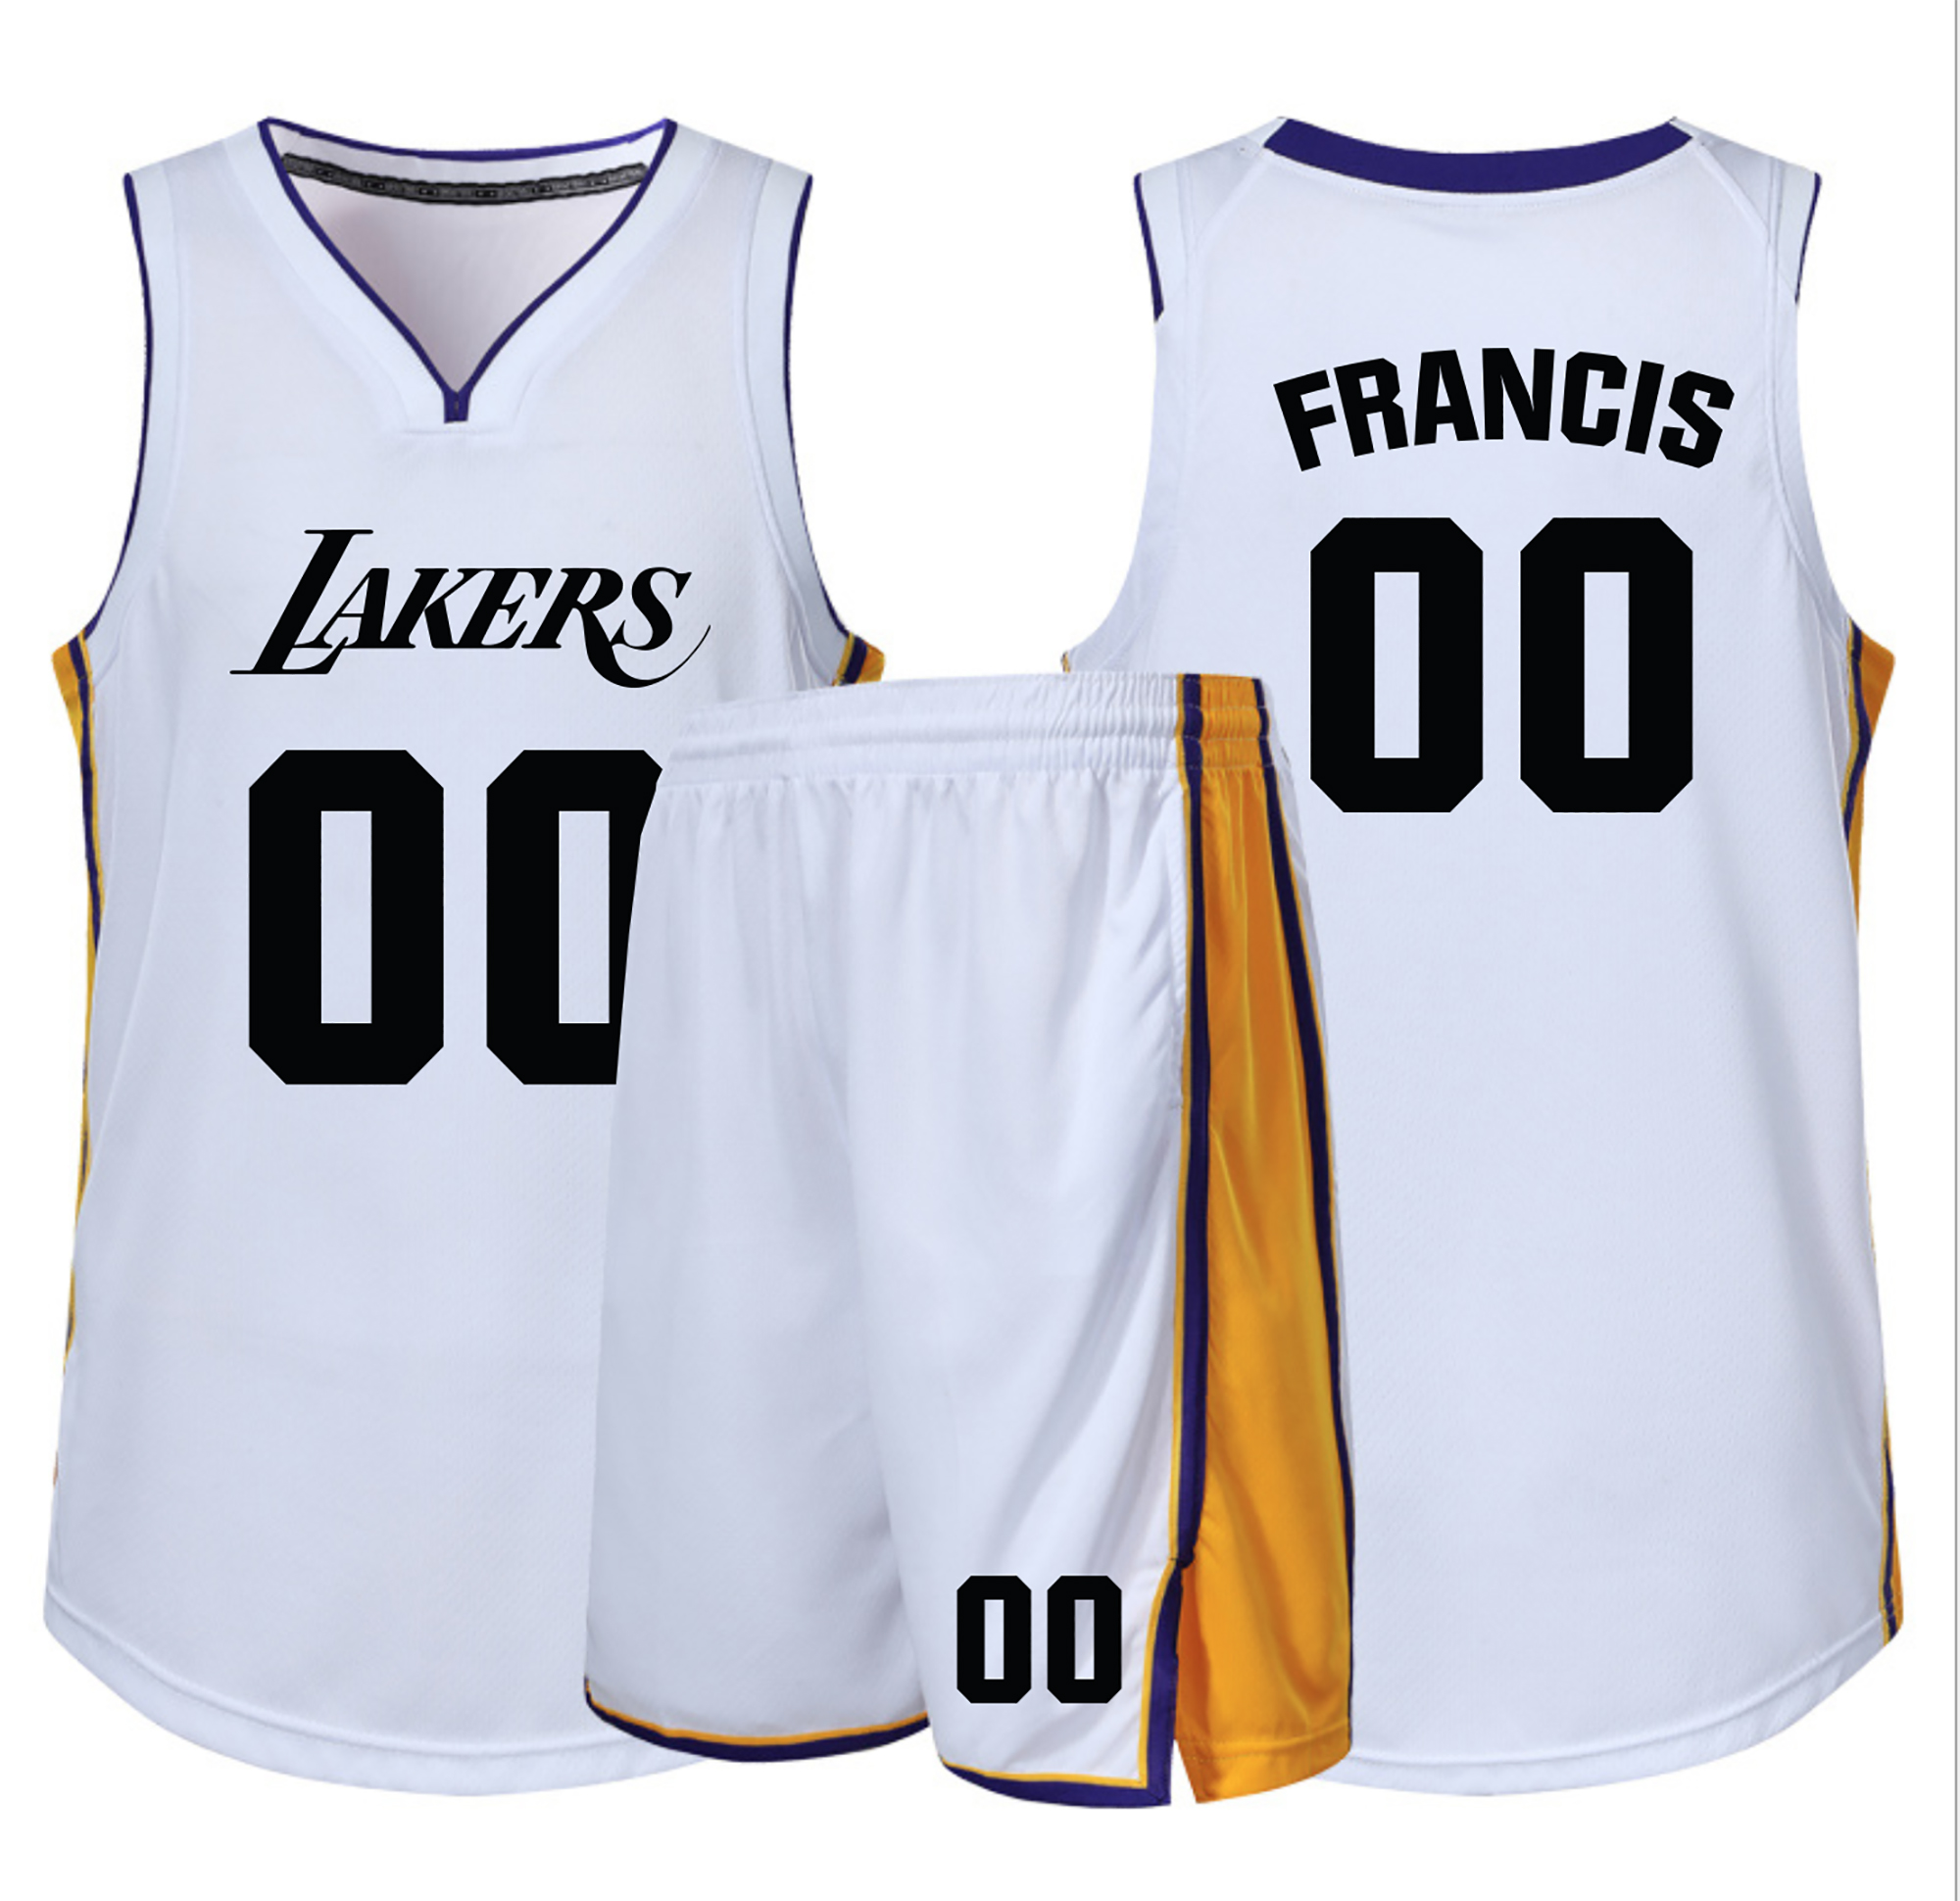 personalized lakers jersey, Off 78%